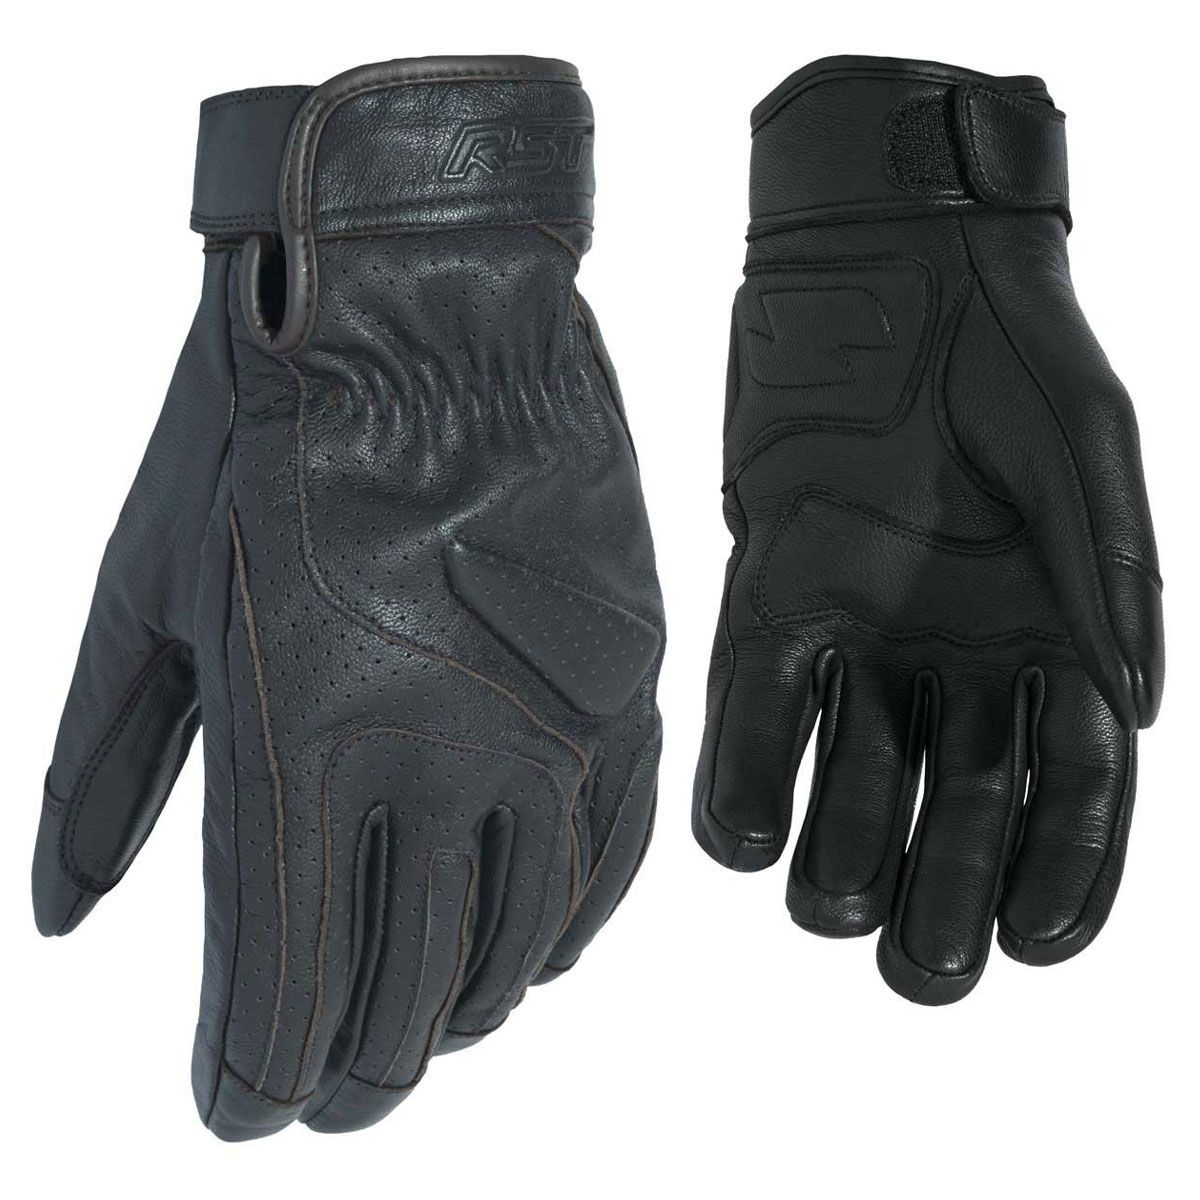 All Colours & Sizes RST Cruz CE Motorbike Motorcycle Retro Gloves 